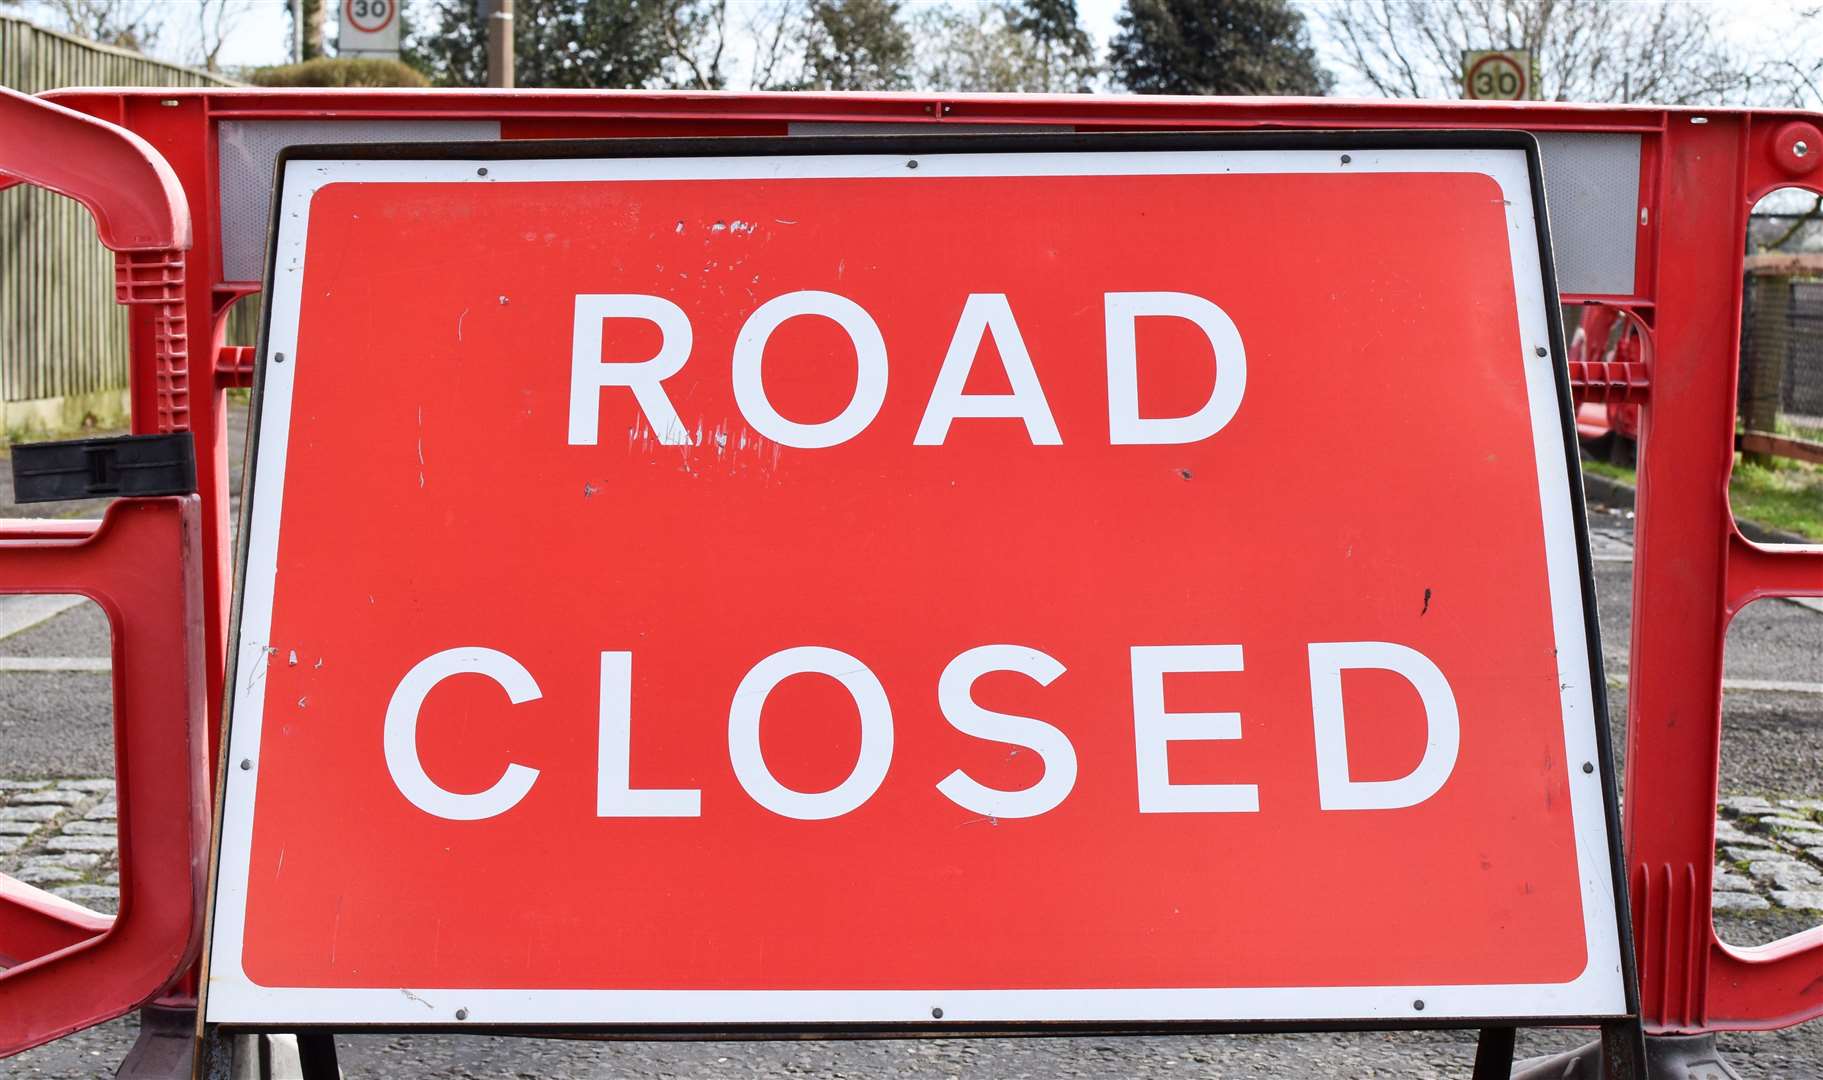 The road is closed for maintenance works. Stock image